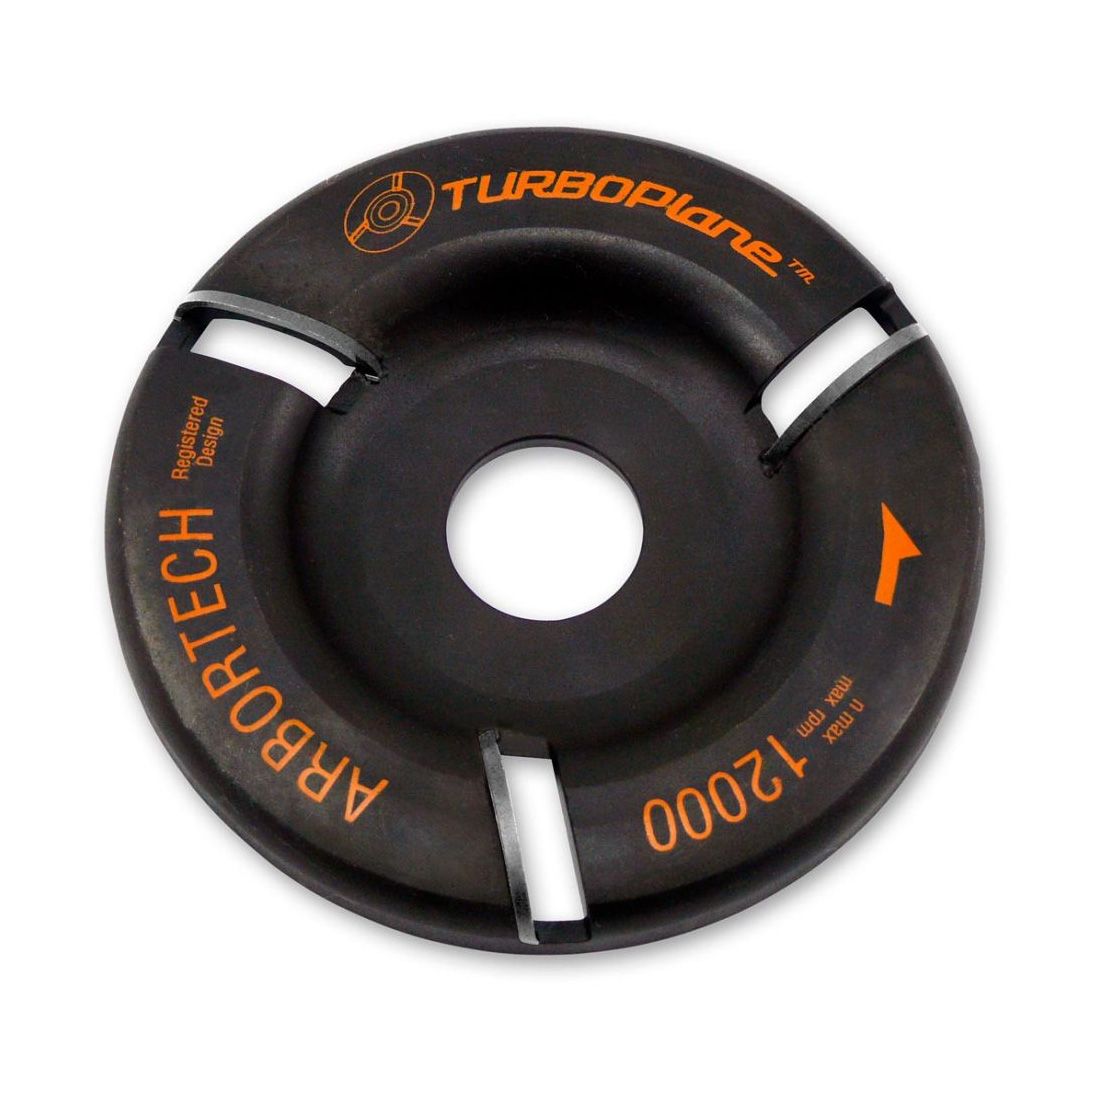 Arbortech Turbo Plane Blade has three cutting blades pressed into the circular dished disc which can be resharpened. Max speed of 12000rpm's and is one directional. Centre hole is 22.2mm for standard 115mm angle grinders.